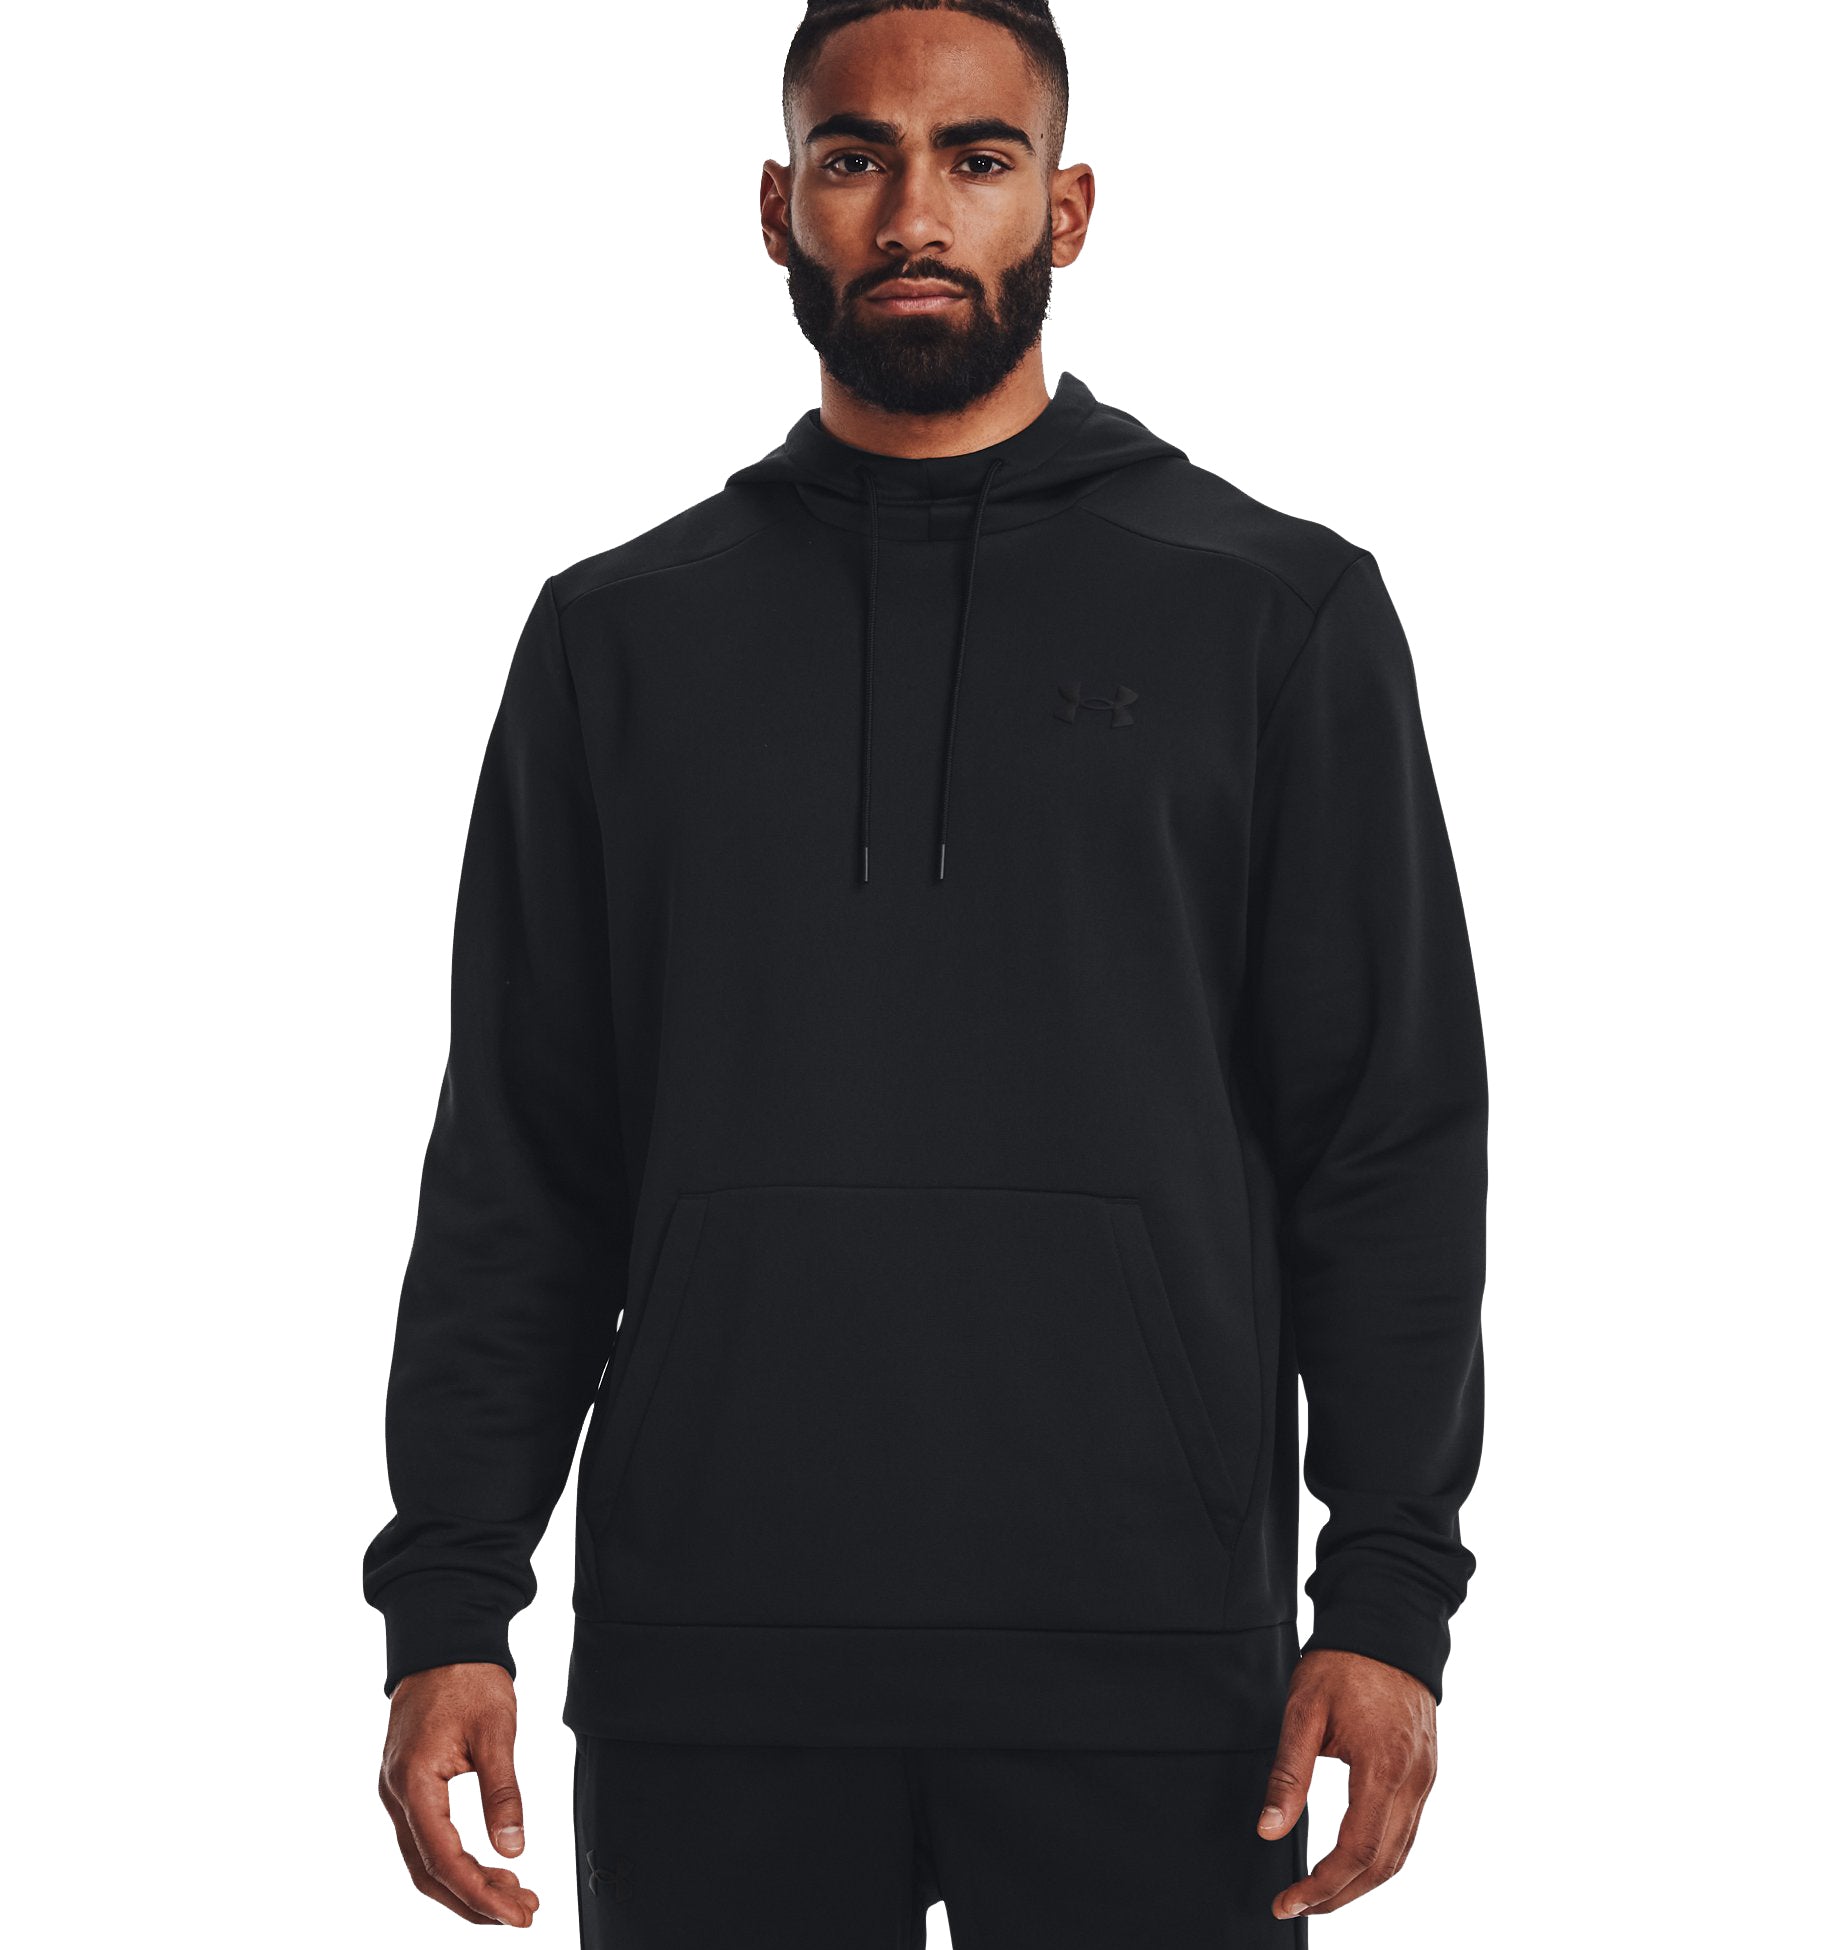 Under Armour Solid Black Pullover Hoodie Size XL - 53% off